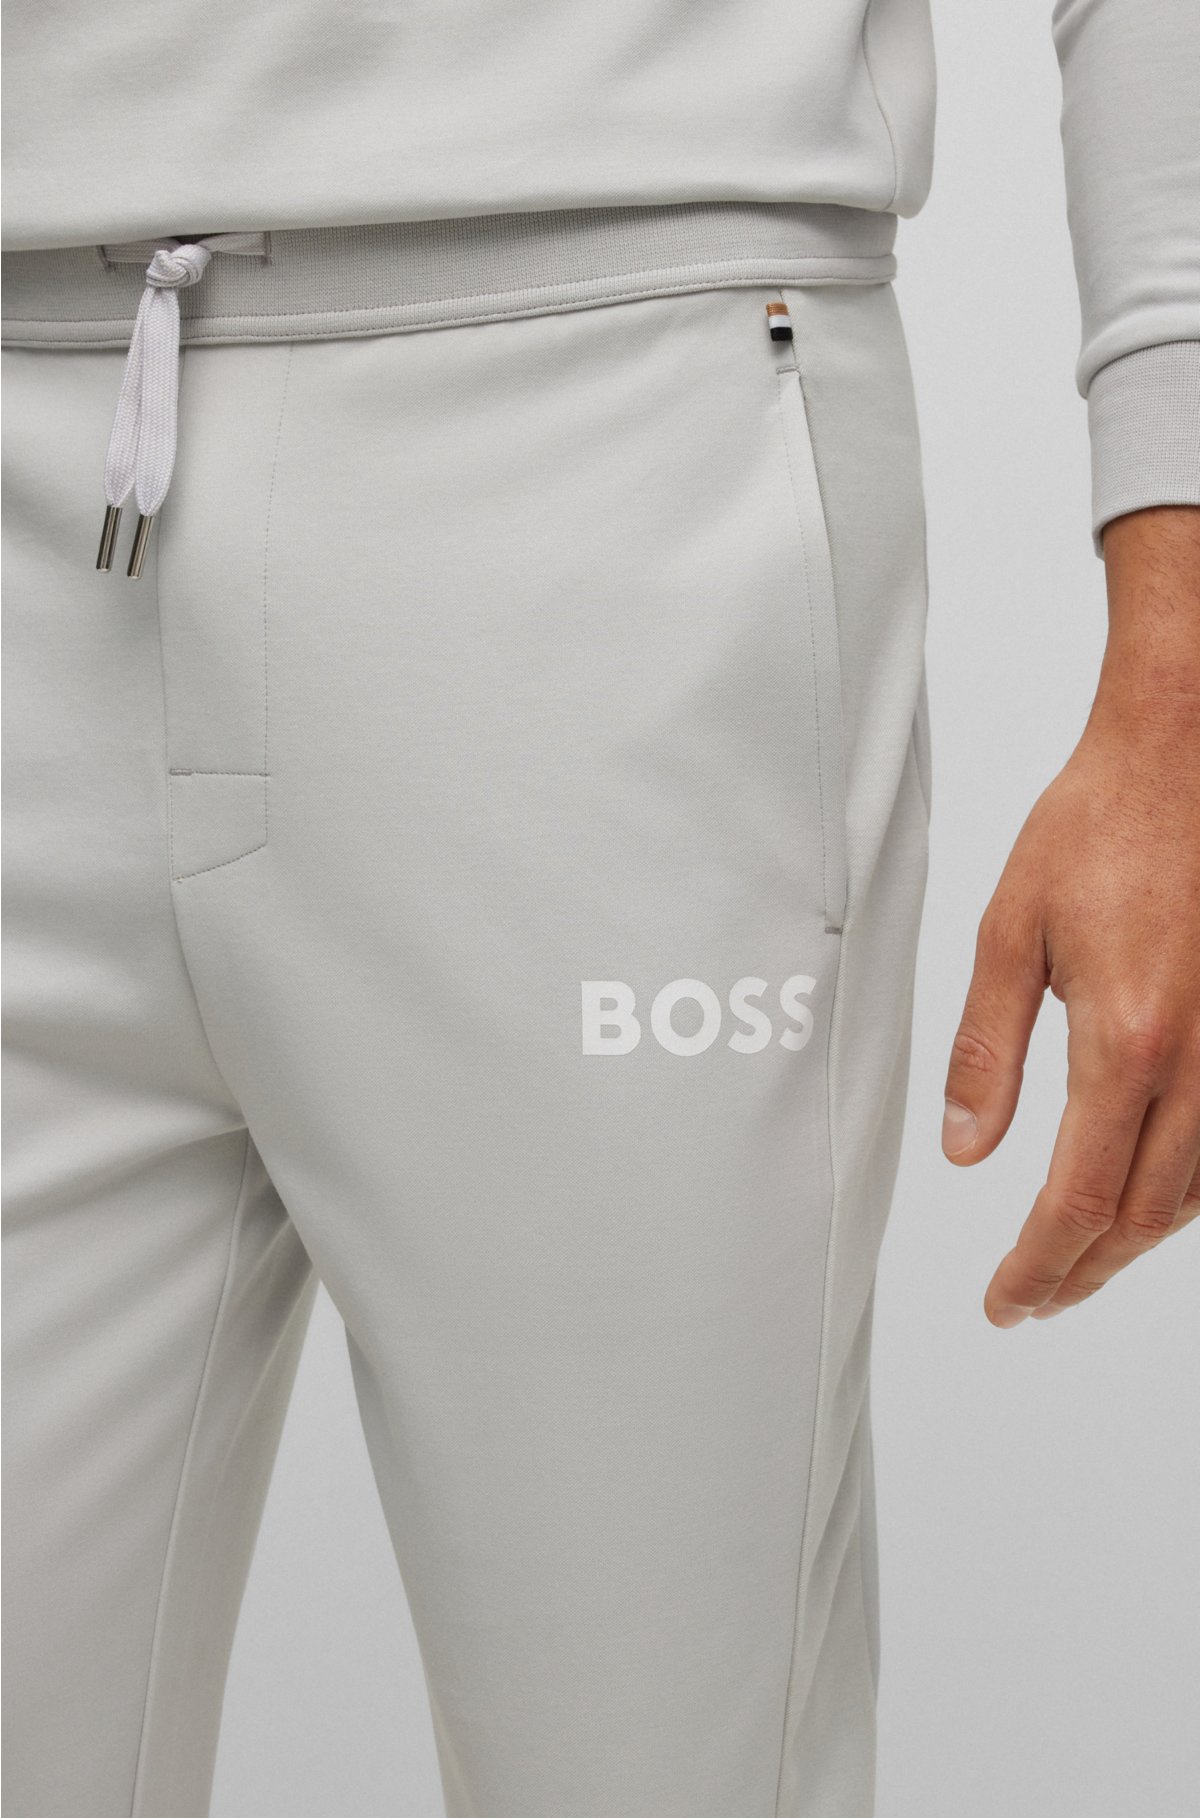 Sweatpants logo - BOSS with embroidered